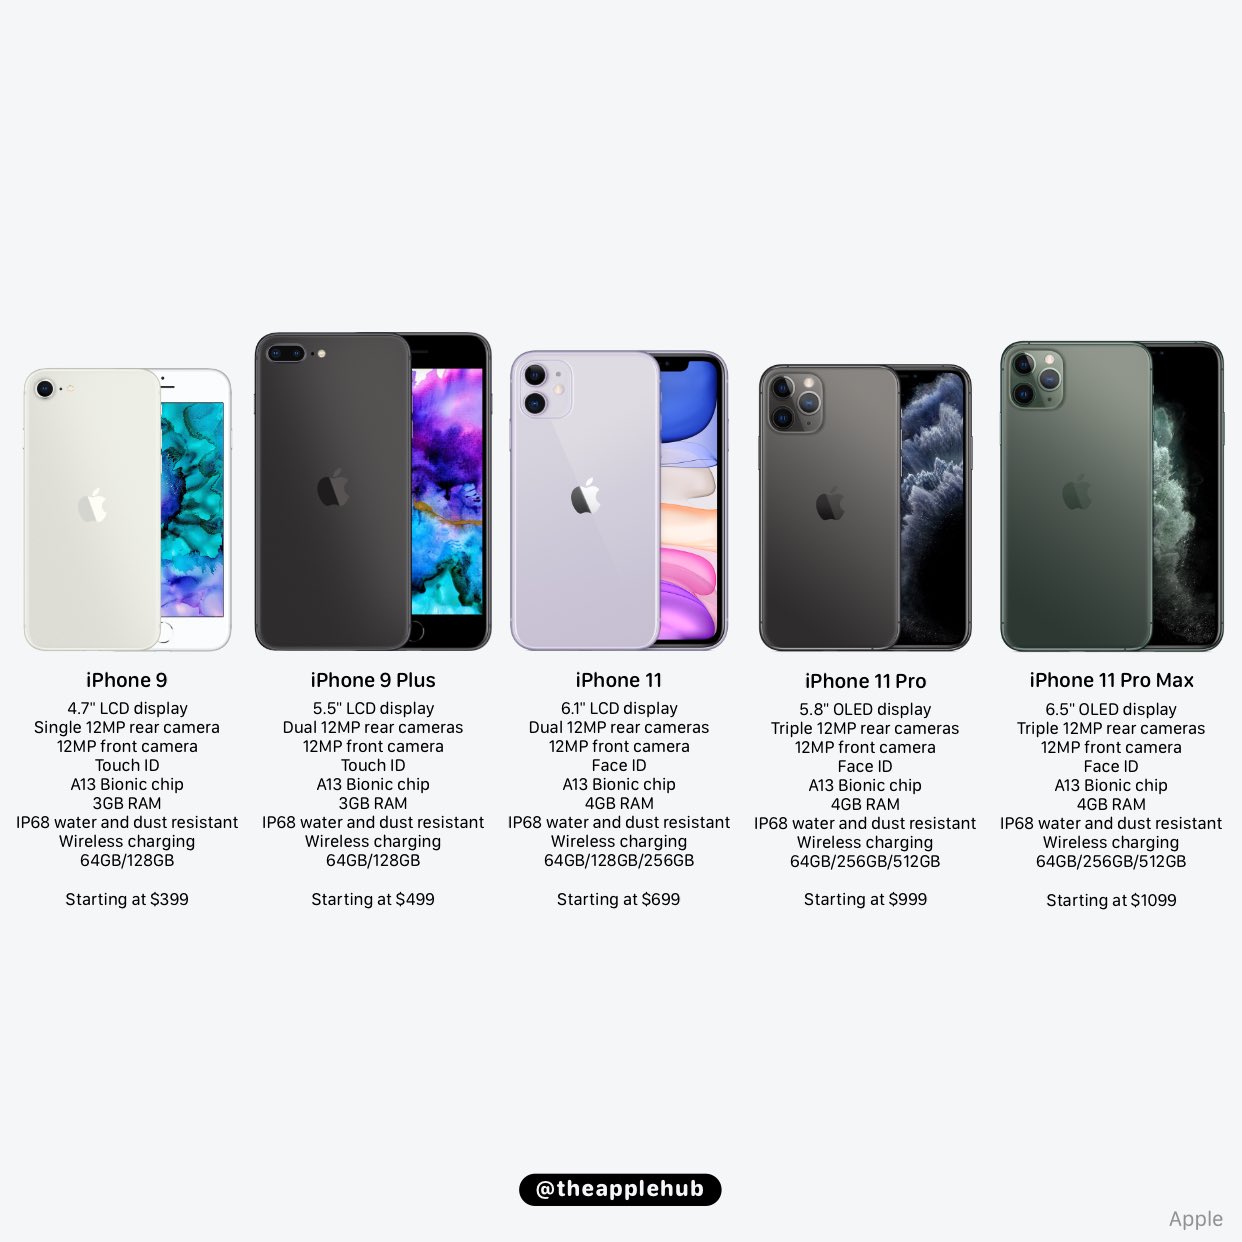 Apple Hub Here Is What The Iphone Lineup Could Look Like In The Coming Weeks Following The Launch Of The Iphone 9 And Iphone 9 Plus T Co Ttd6xfnfjd Twitter